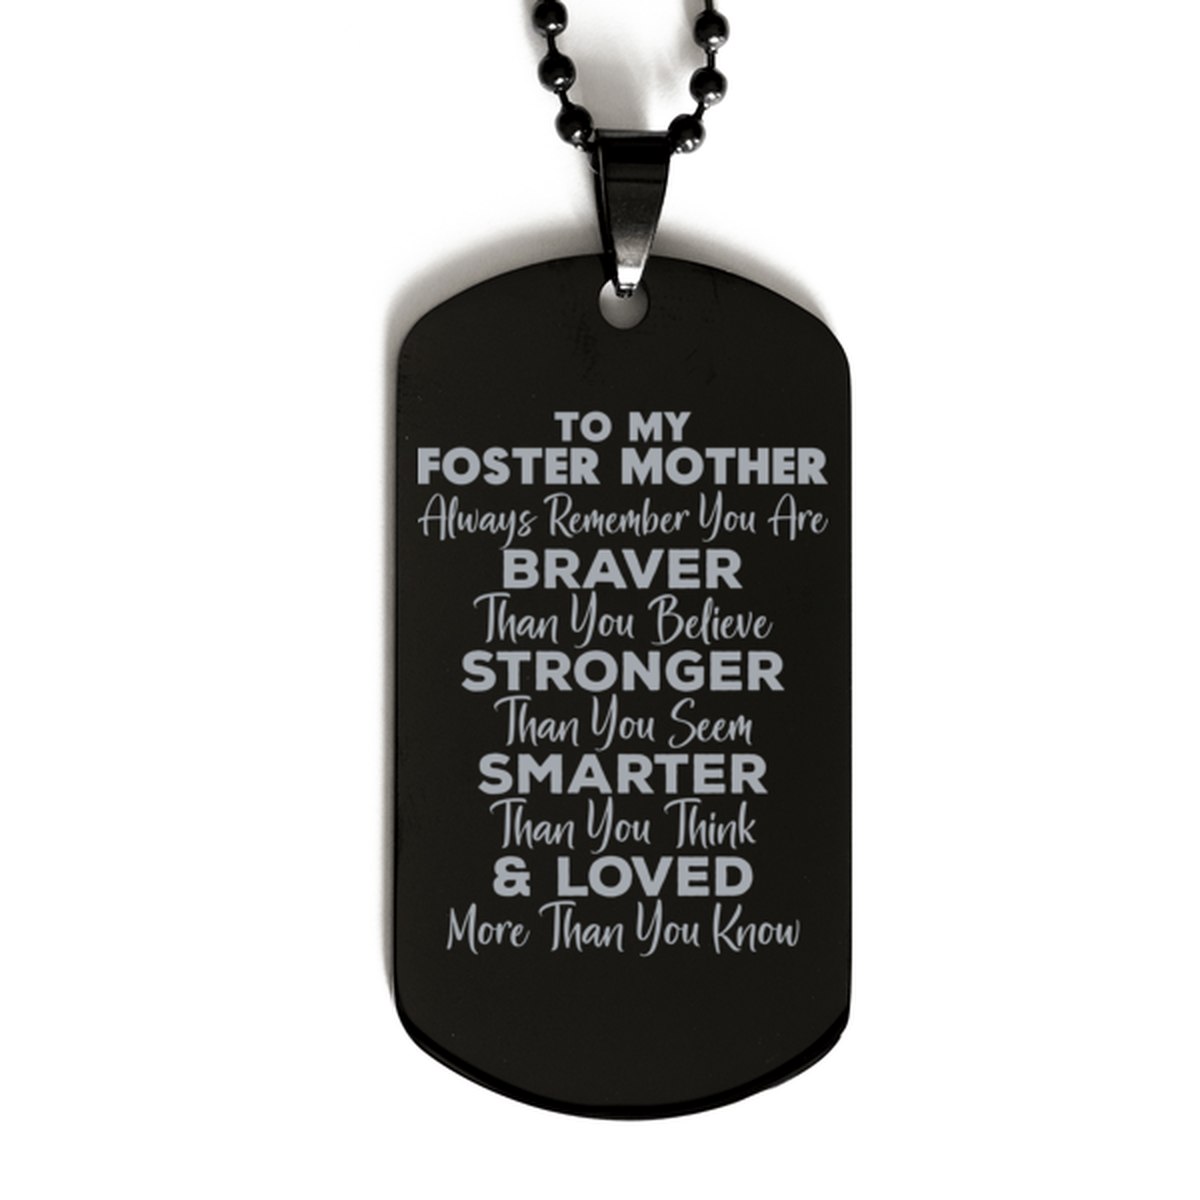 Motivational Foster Mother Black Dog Tag Necklace, Foster Mother Always Remember You Are Braver Than You Believe, Best Birthday Gifts for Foster Mother